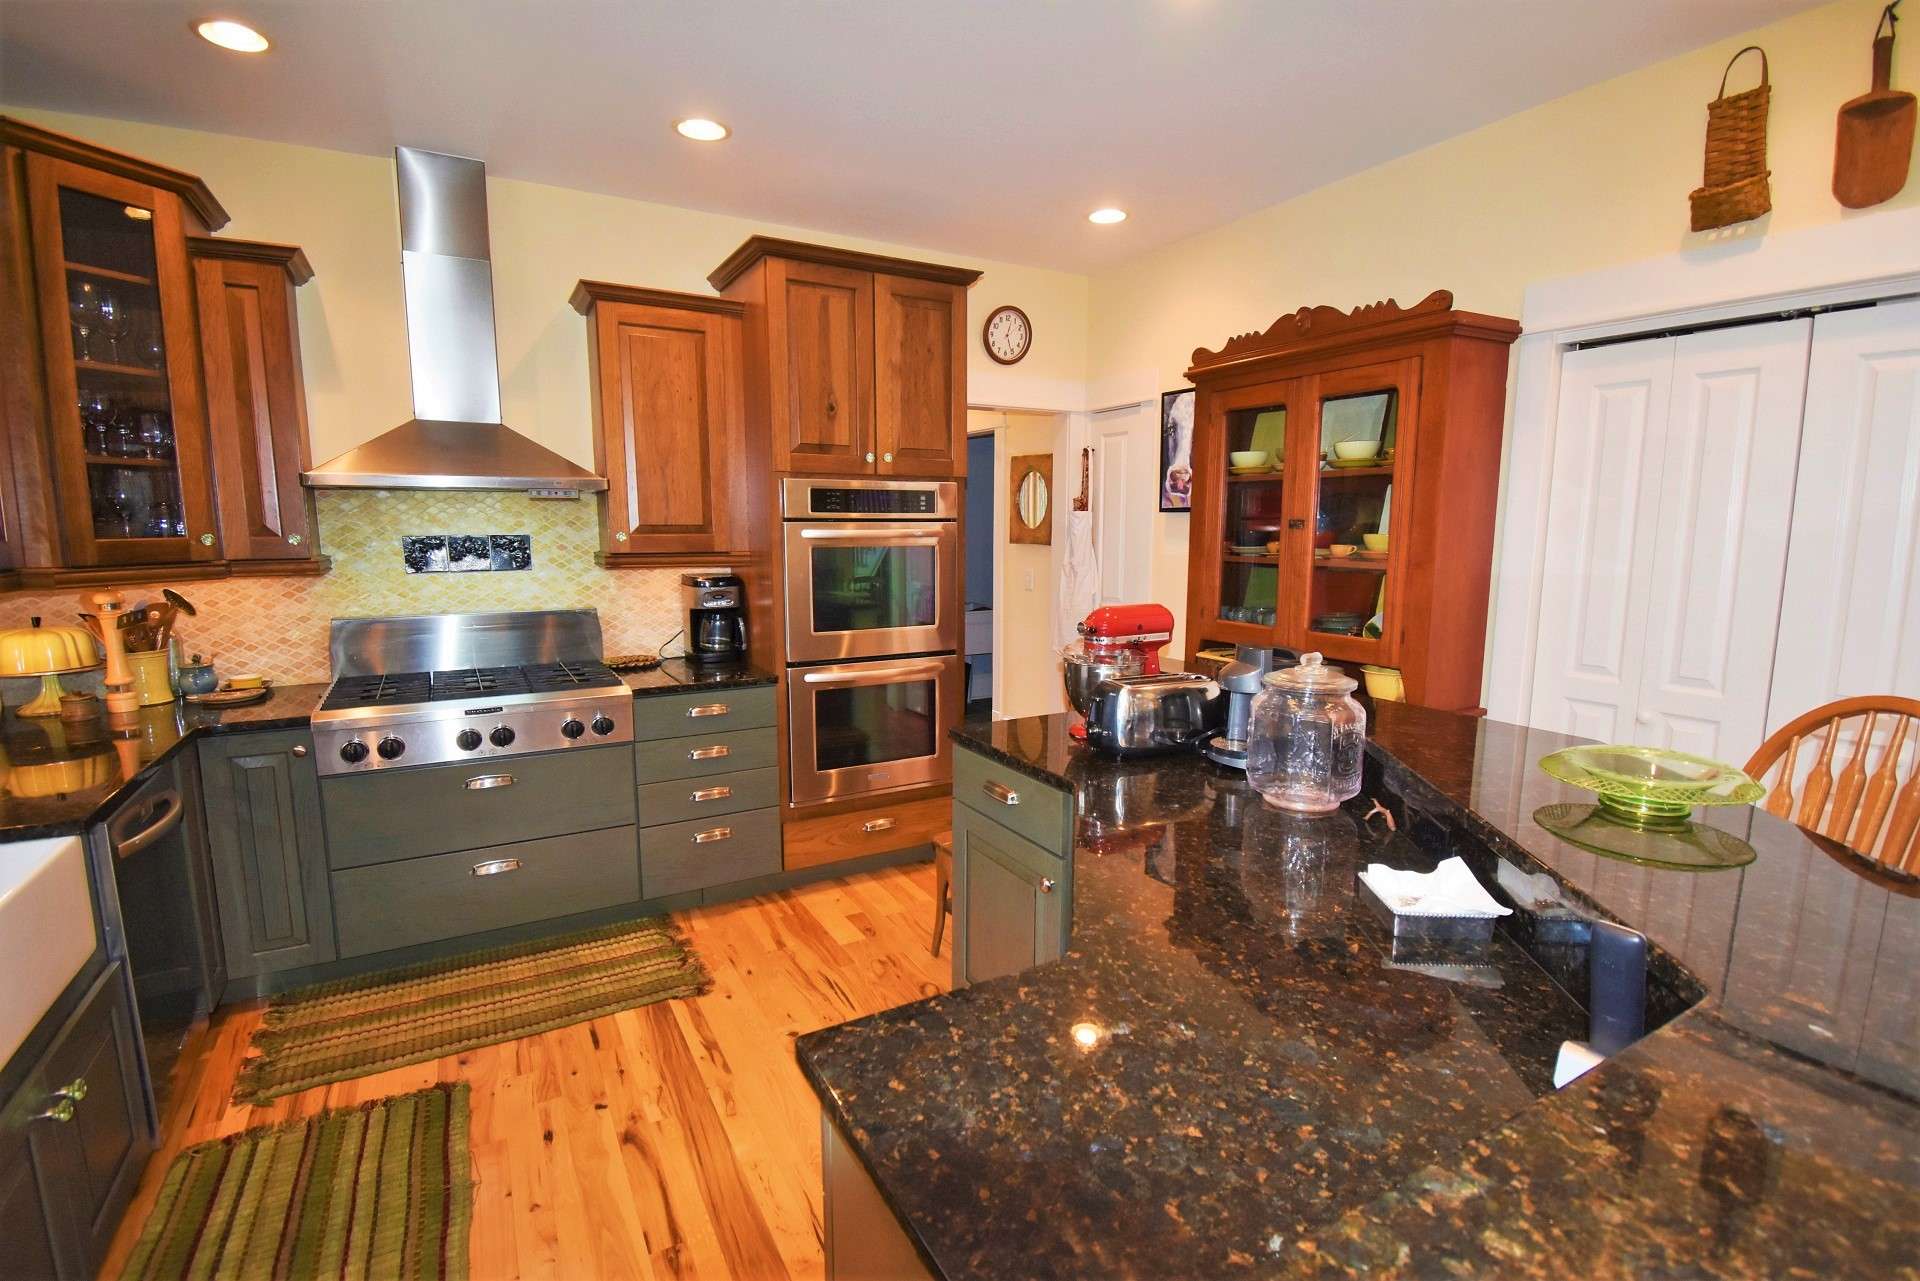 This well planned kitchen is sure to please any chef with its Hickory cabinets, granite counter tops, stainless appliances including a double wall oven with convection oven, farm sink and an island with bar seating.